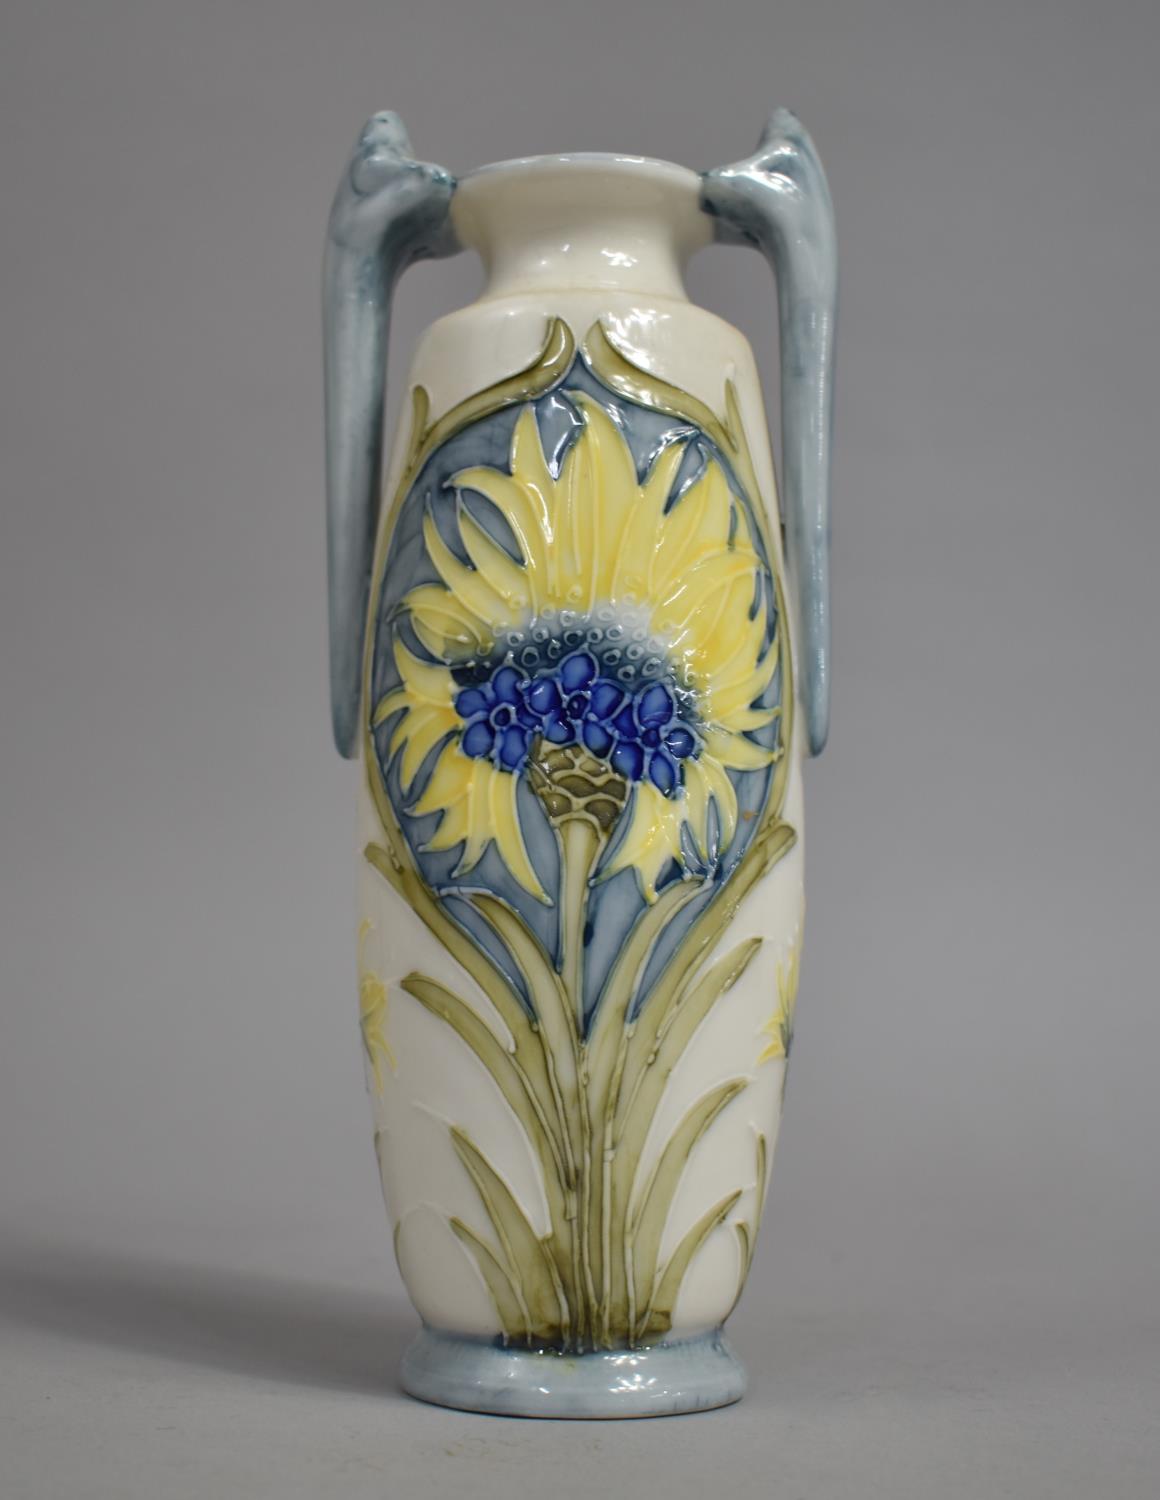 A Nice Quality Two Handled Floral Vase in the Manner of McIntyre Florin ware, 22cm high